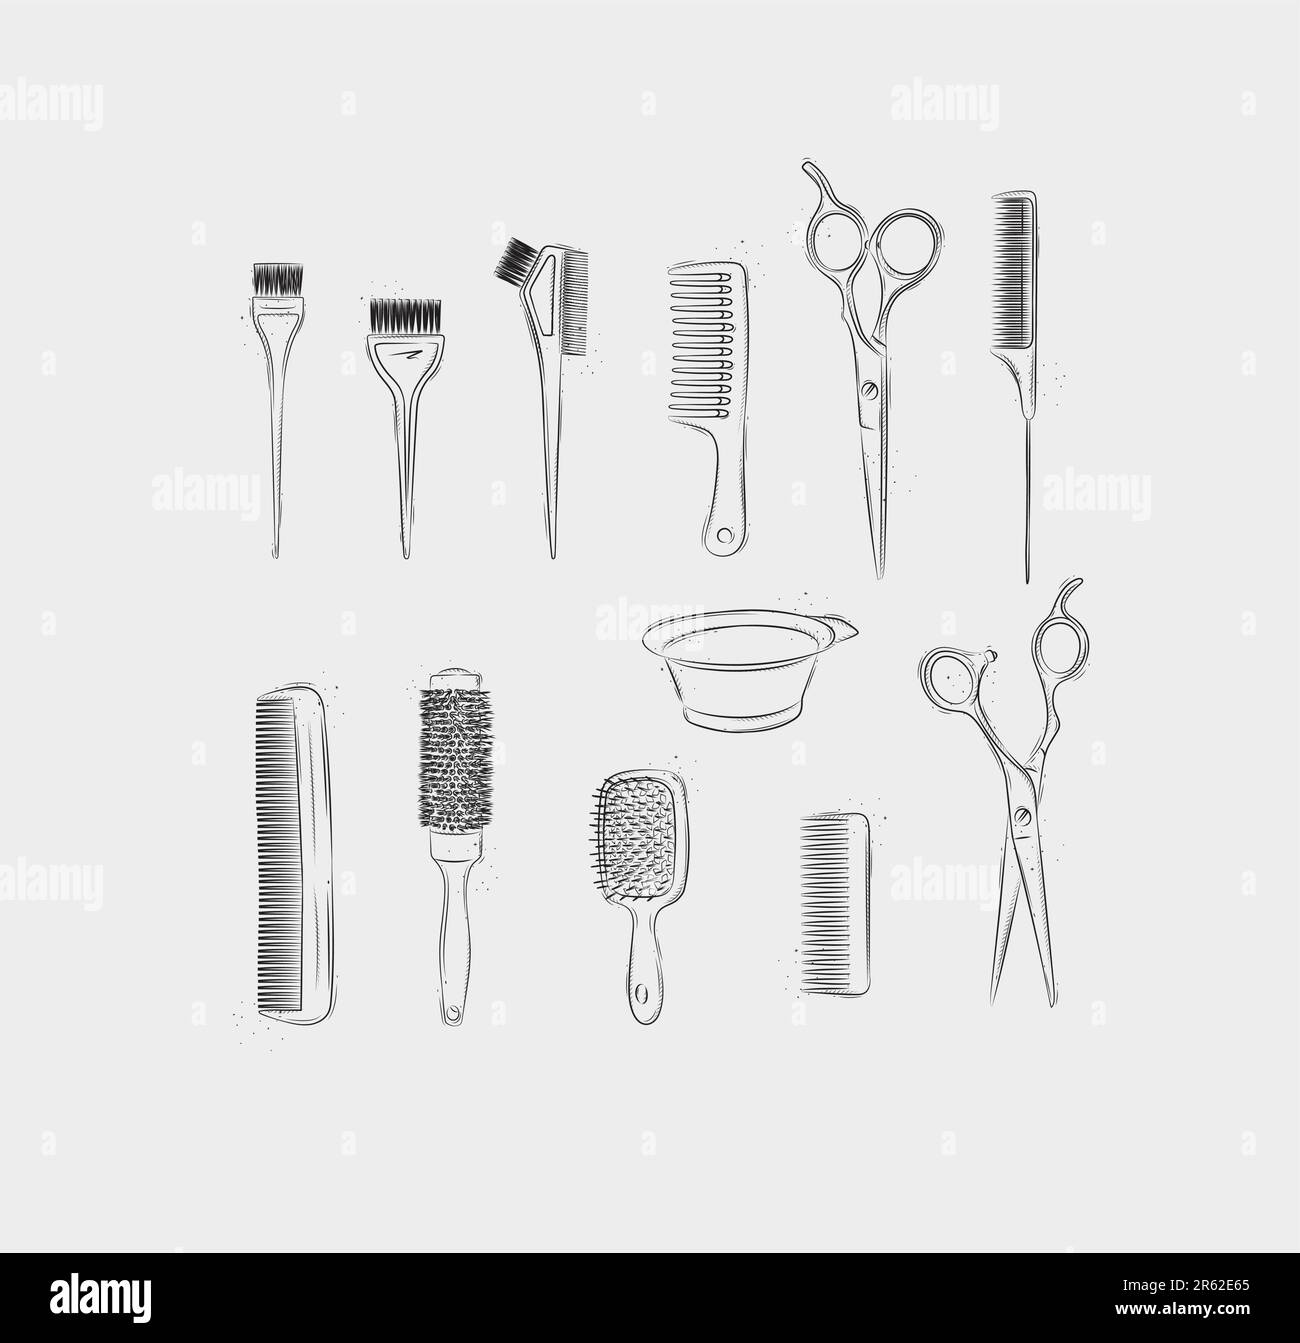 Hairdresser comb types and hair dye brushes collection drawing on light background Stock Vector